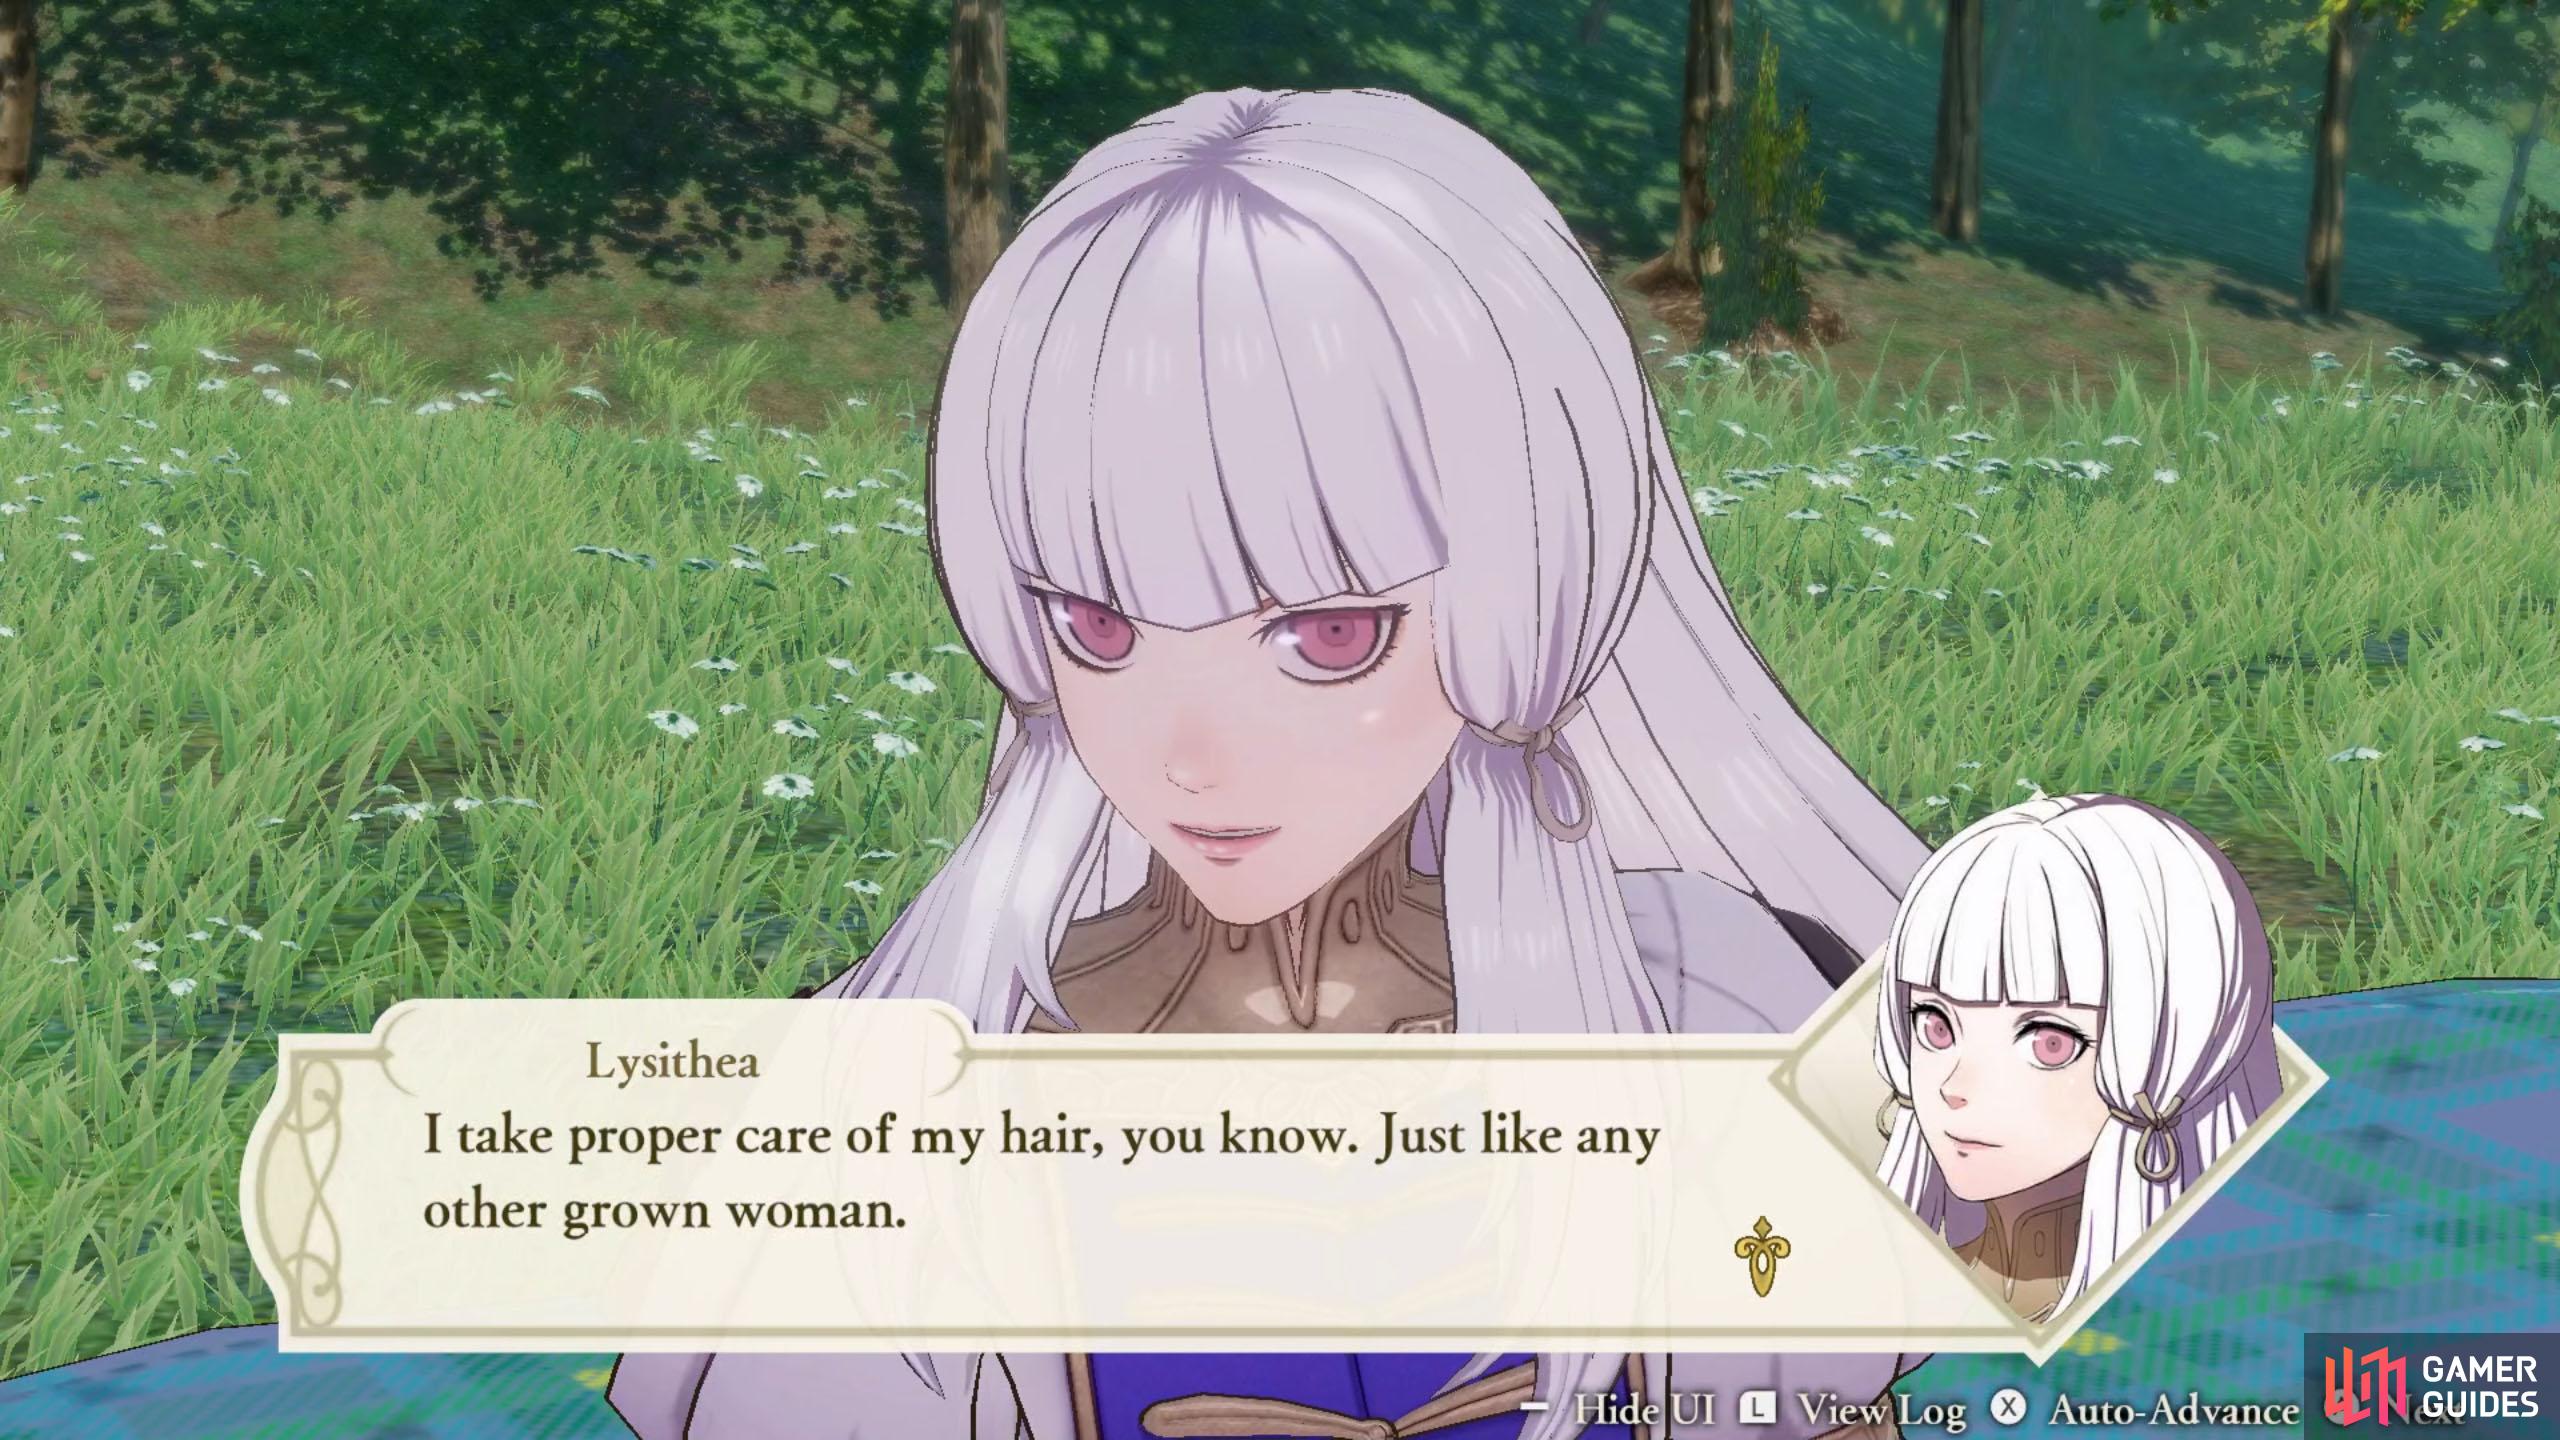 Lysitheas hair is pretty nice; we should ask what shampoo she uses.